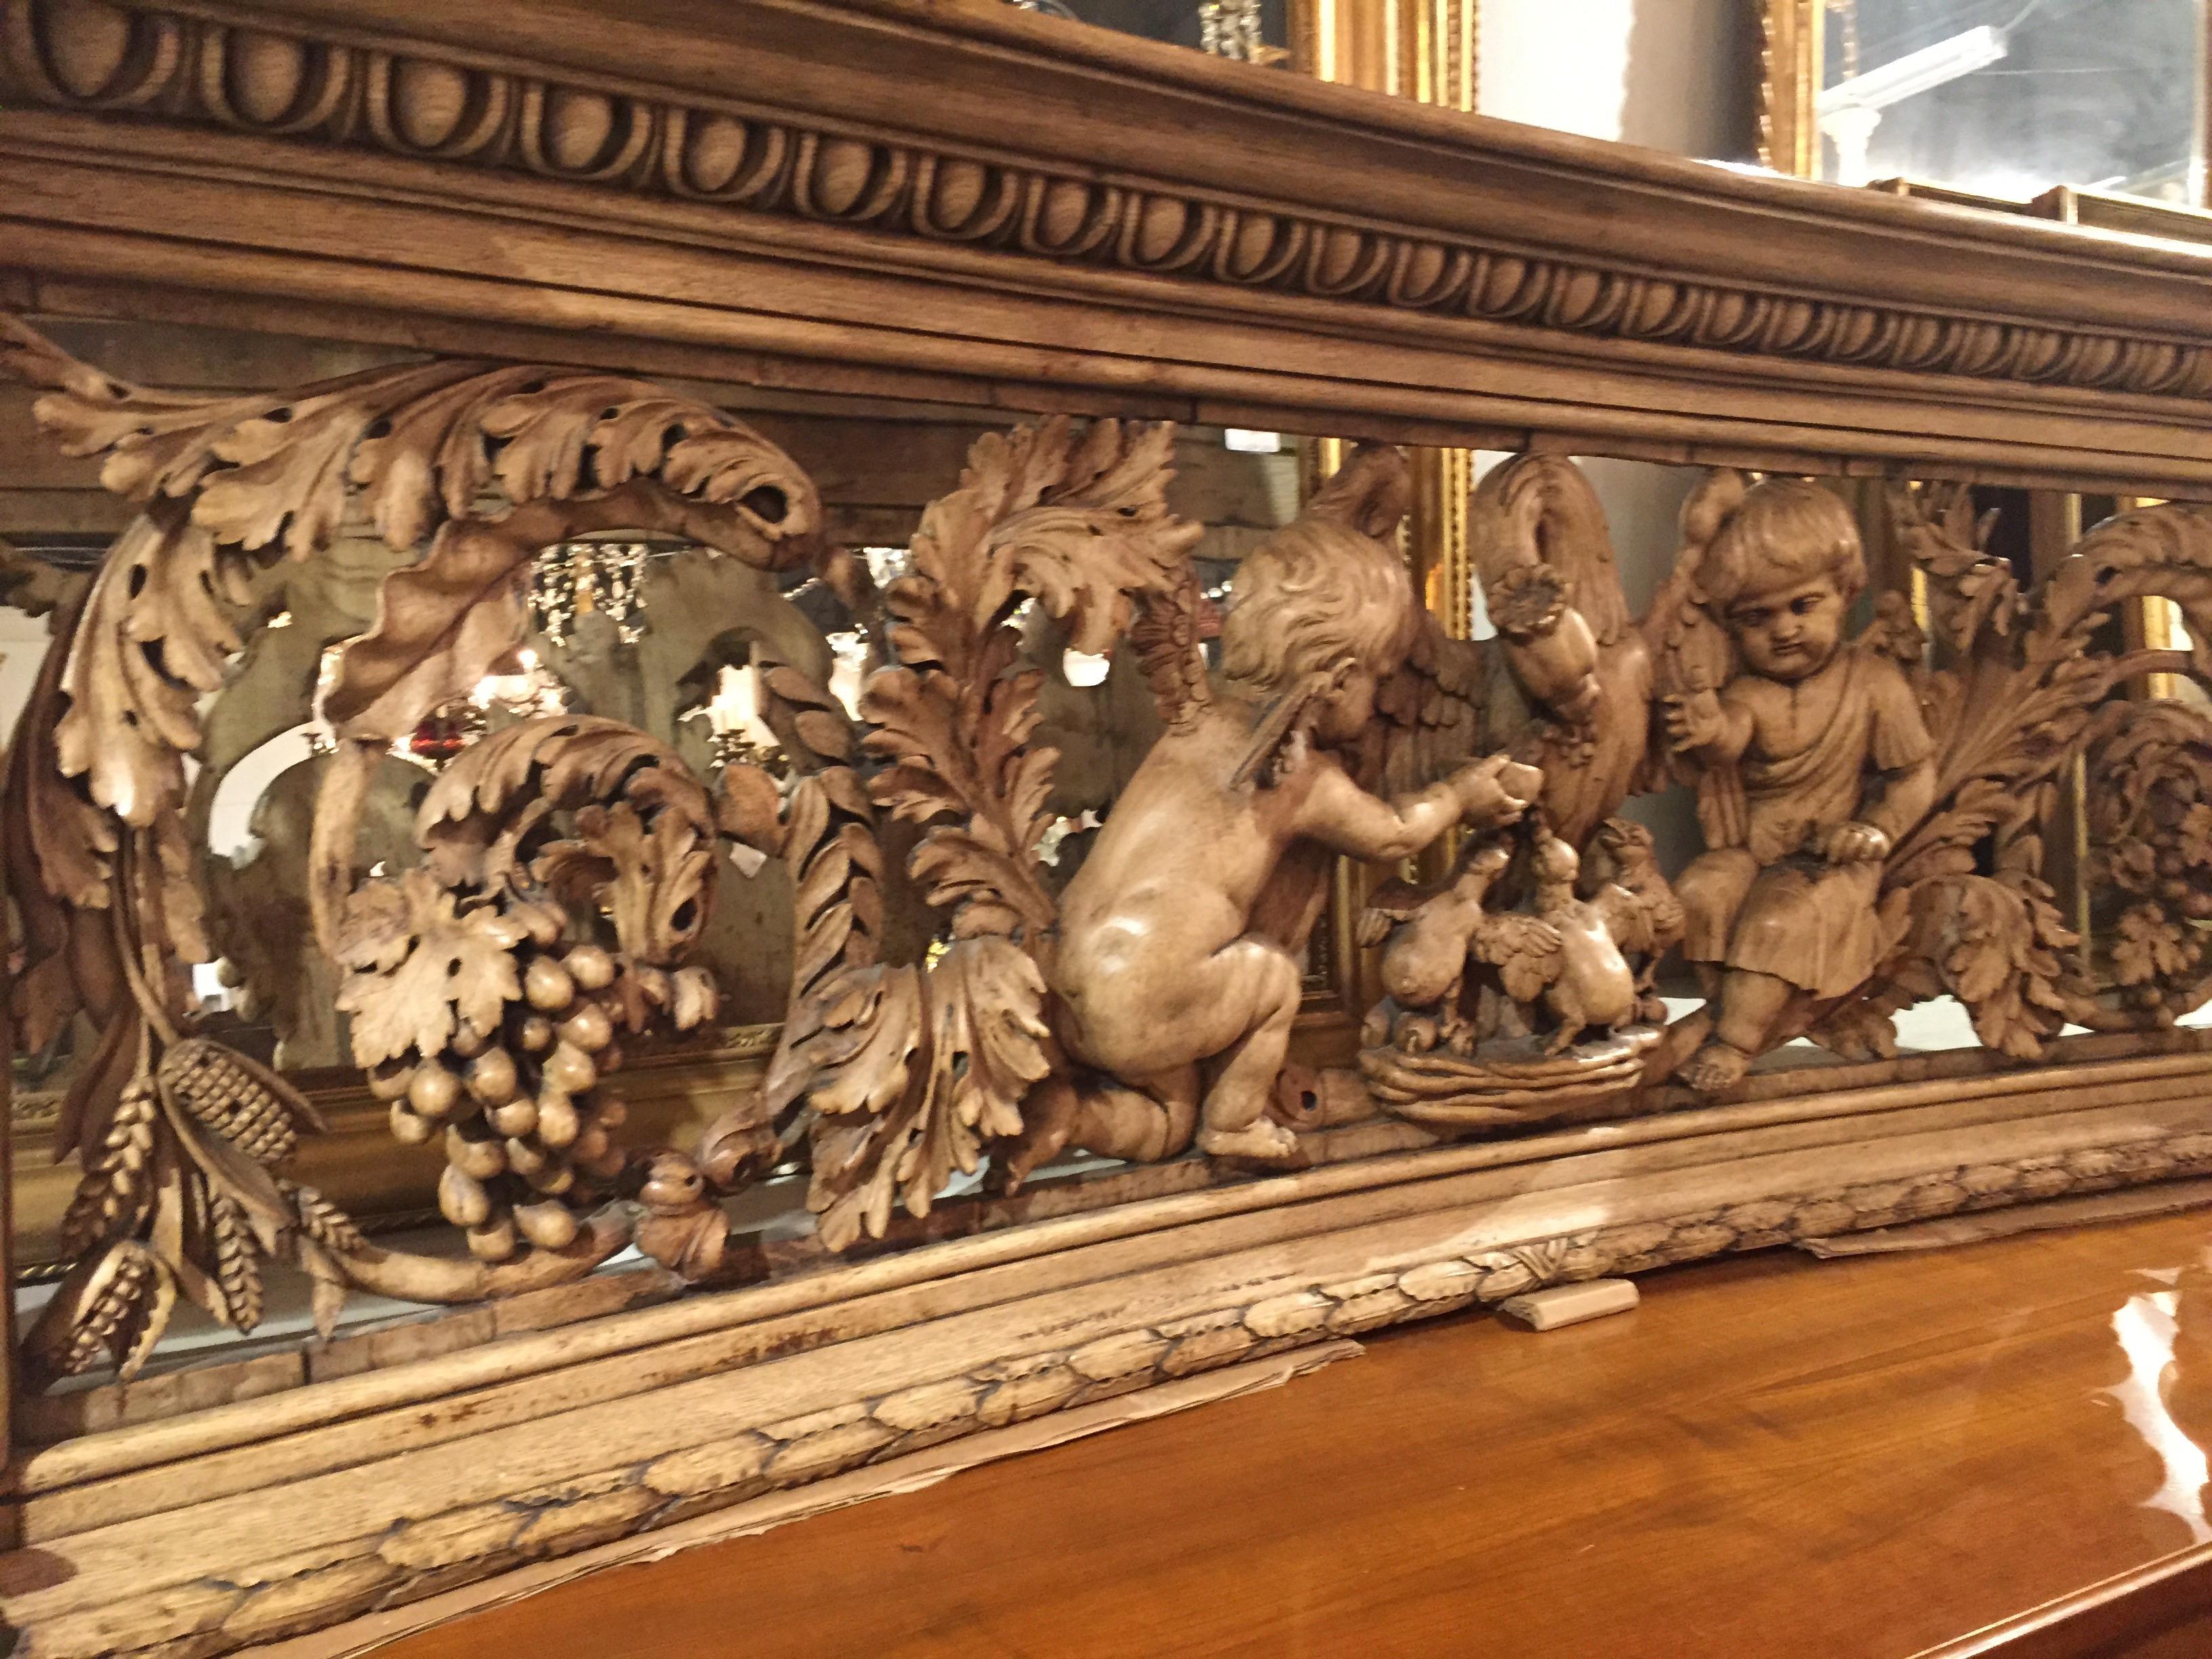 An incredible hand carved bleached oak architectural panel from France. Depicts a scene with cherub children and a mother goose and her goslings. On the edges are a carving of a women and a man. An amazing display of Fine craftsmanship. One has to